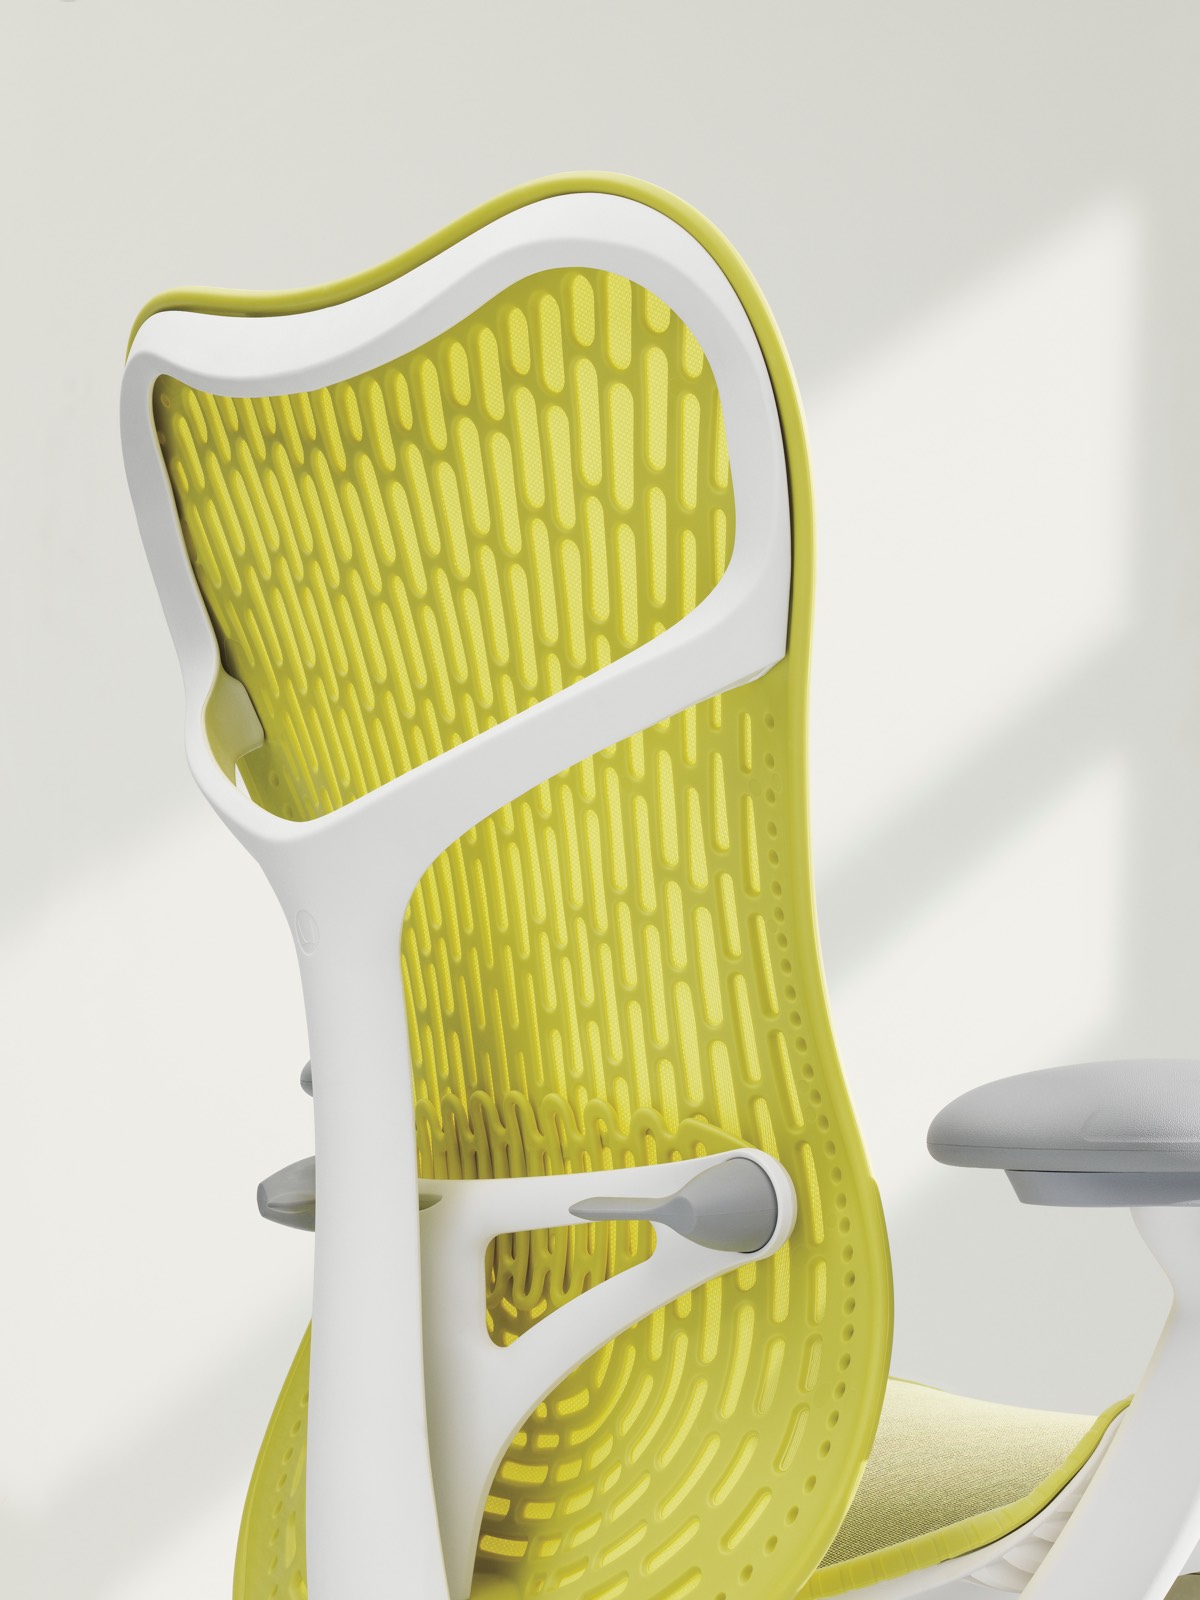 Back view of a yellow Mirra 2 office chair.